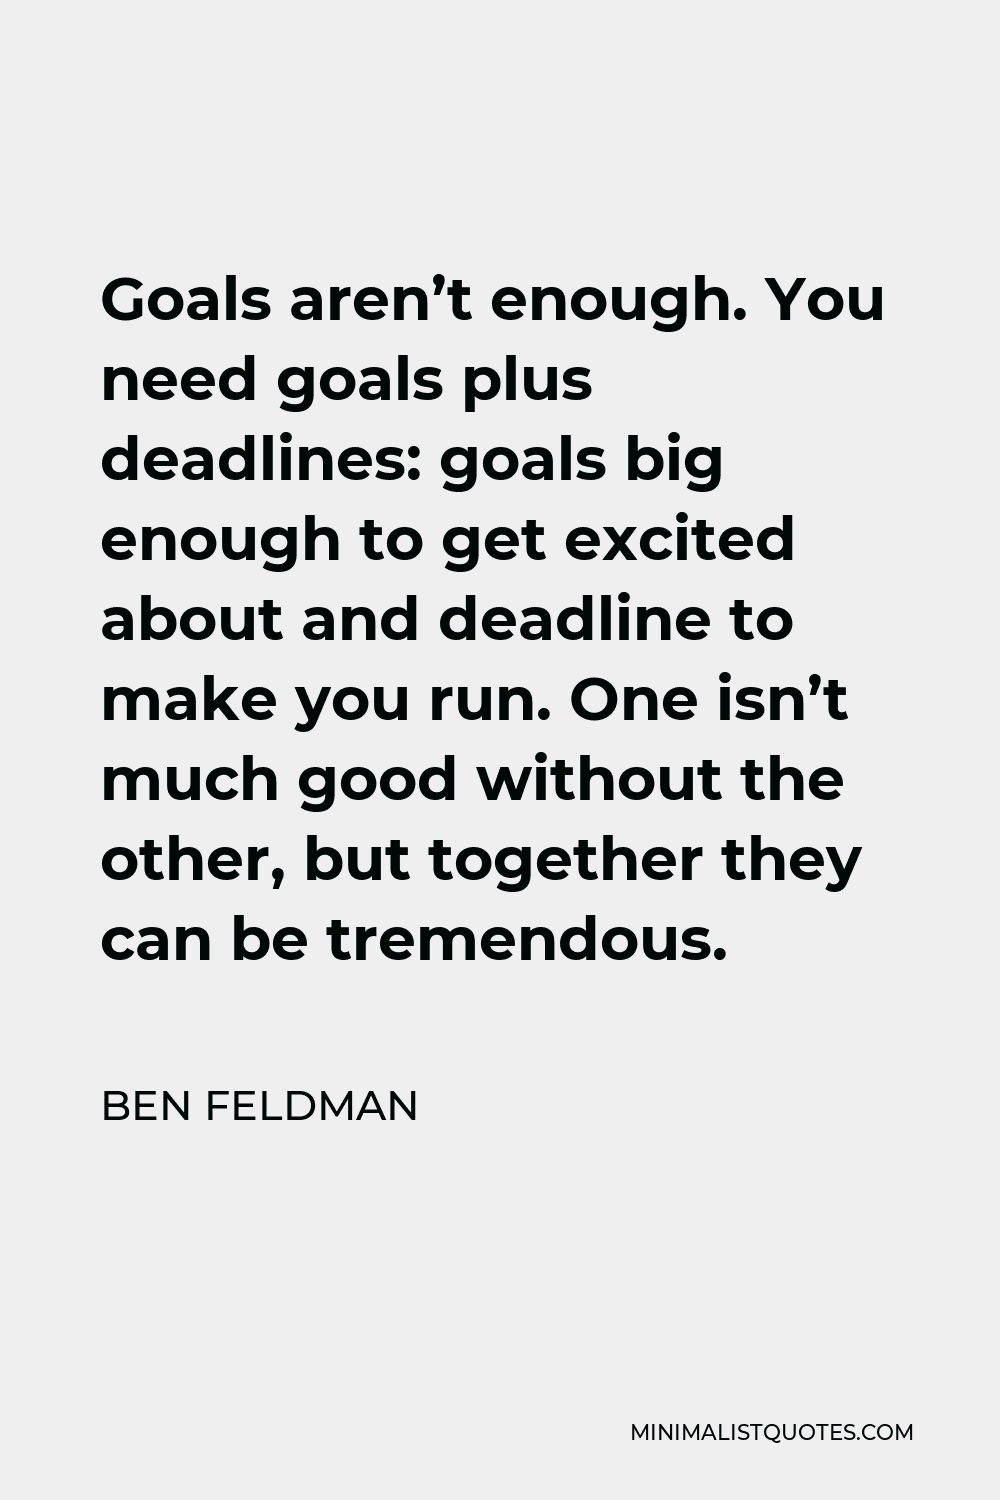 Ben Feldman Quote - Goals aren’t enough. You need goals plus deadlines: goals big enough to get excited about and deadline to make you run. One isn’t much good without the other, but together they can be tremendous.